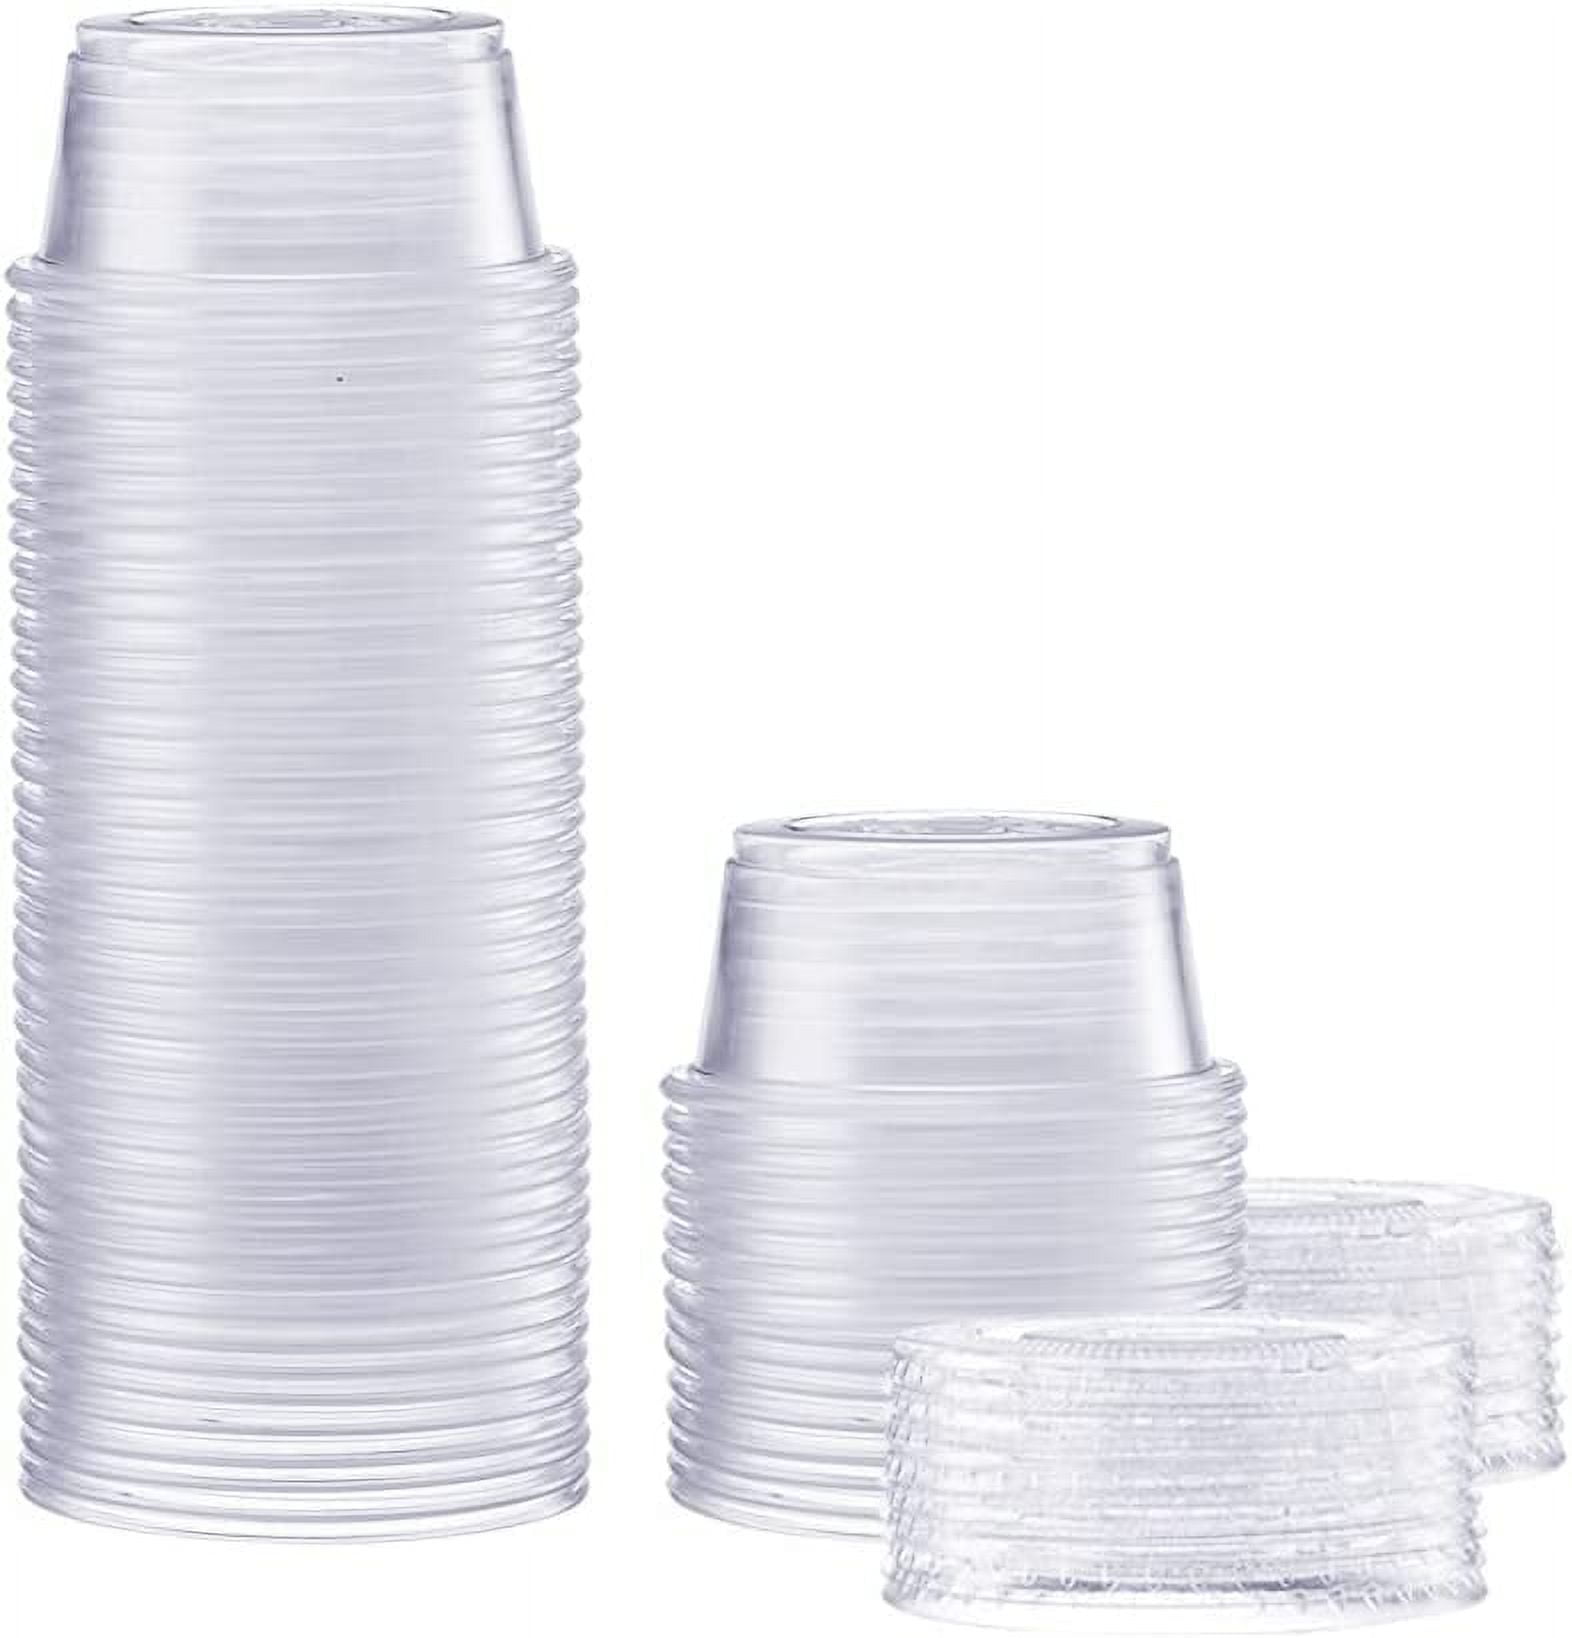 2oz Plastic Containers With Lids 100pcs Qty 50 Containers 